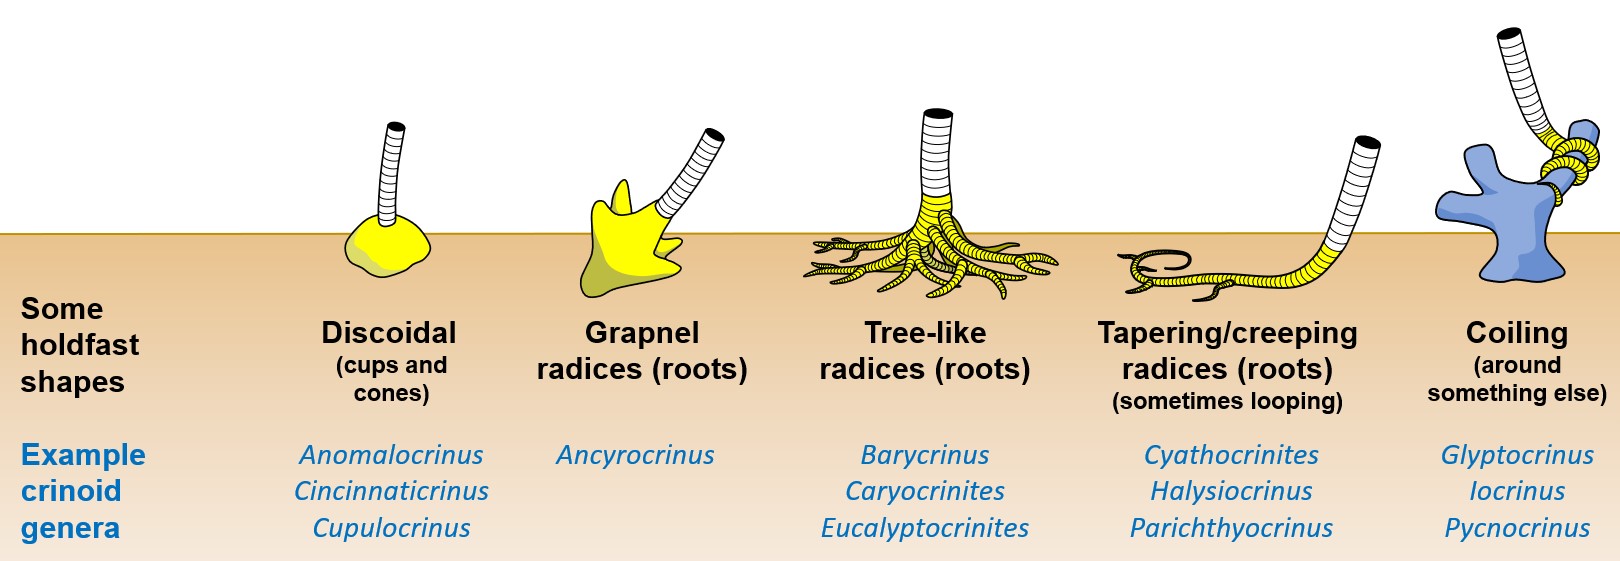 Diagram of differing forms of crinoid holdfasts.